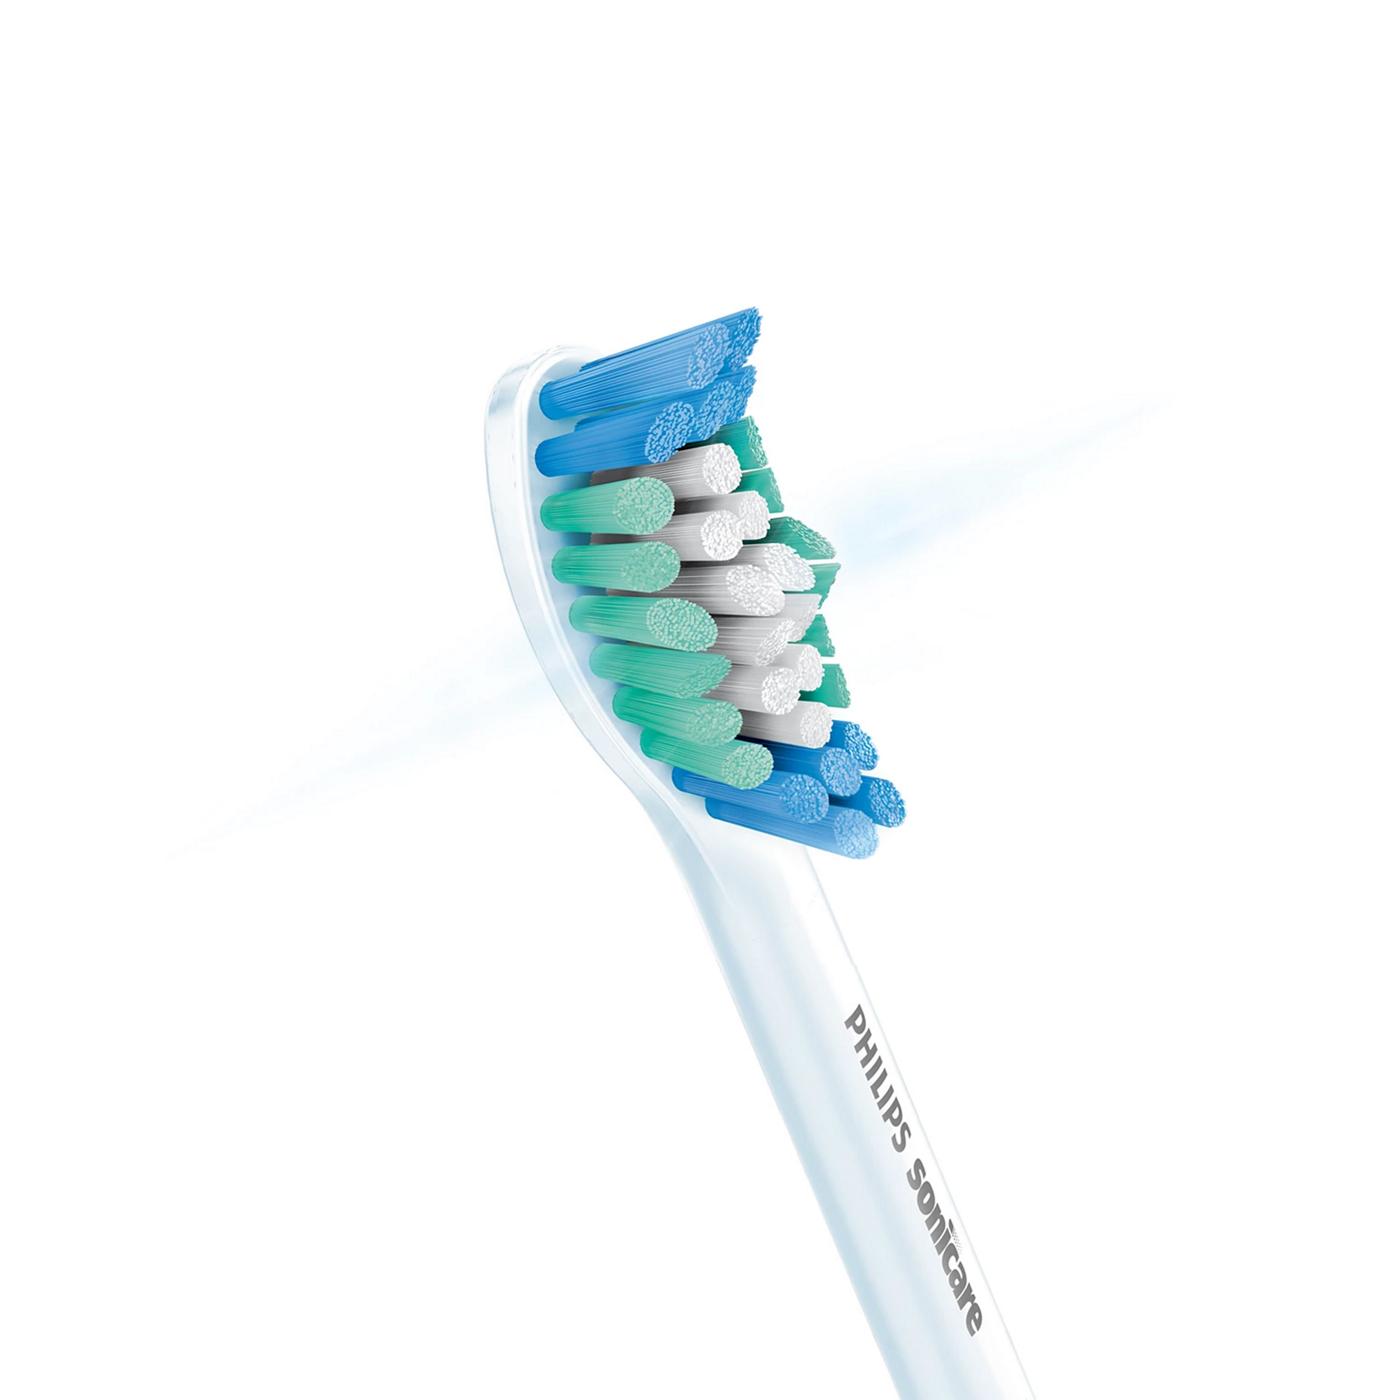 Philips Sonicare Simply Clean Brush Heads C1; image 2 of 3